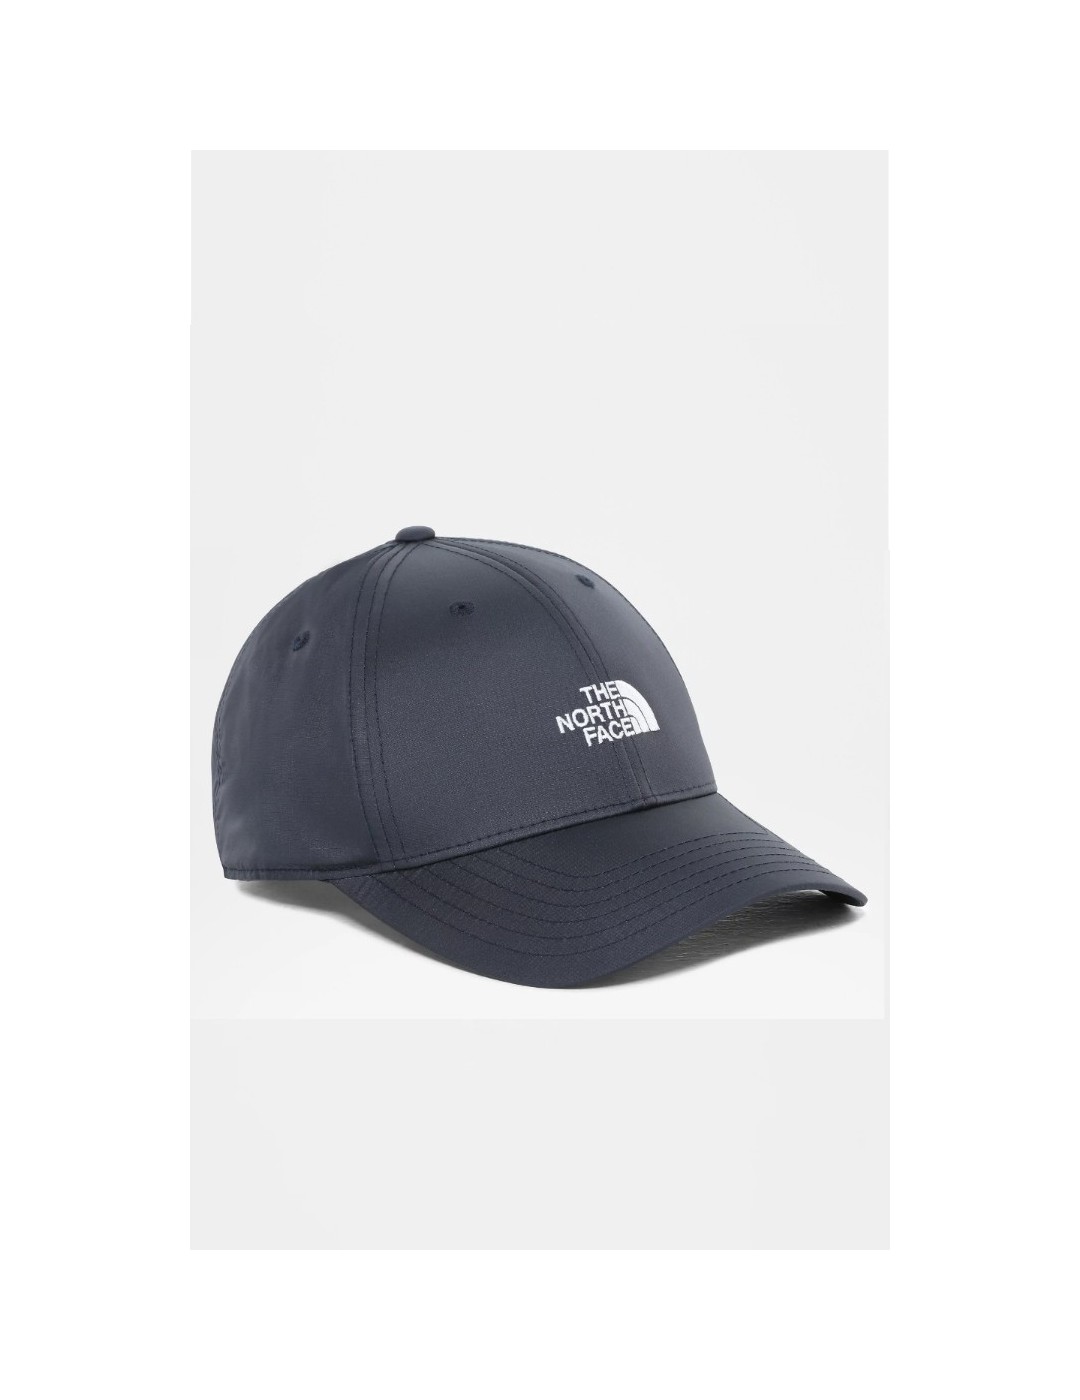 GORRA THE NORTH FACE 66 CLASSIC TECH HAT  AVIATOR NAVY